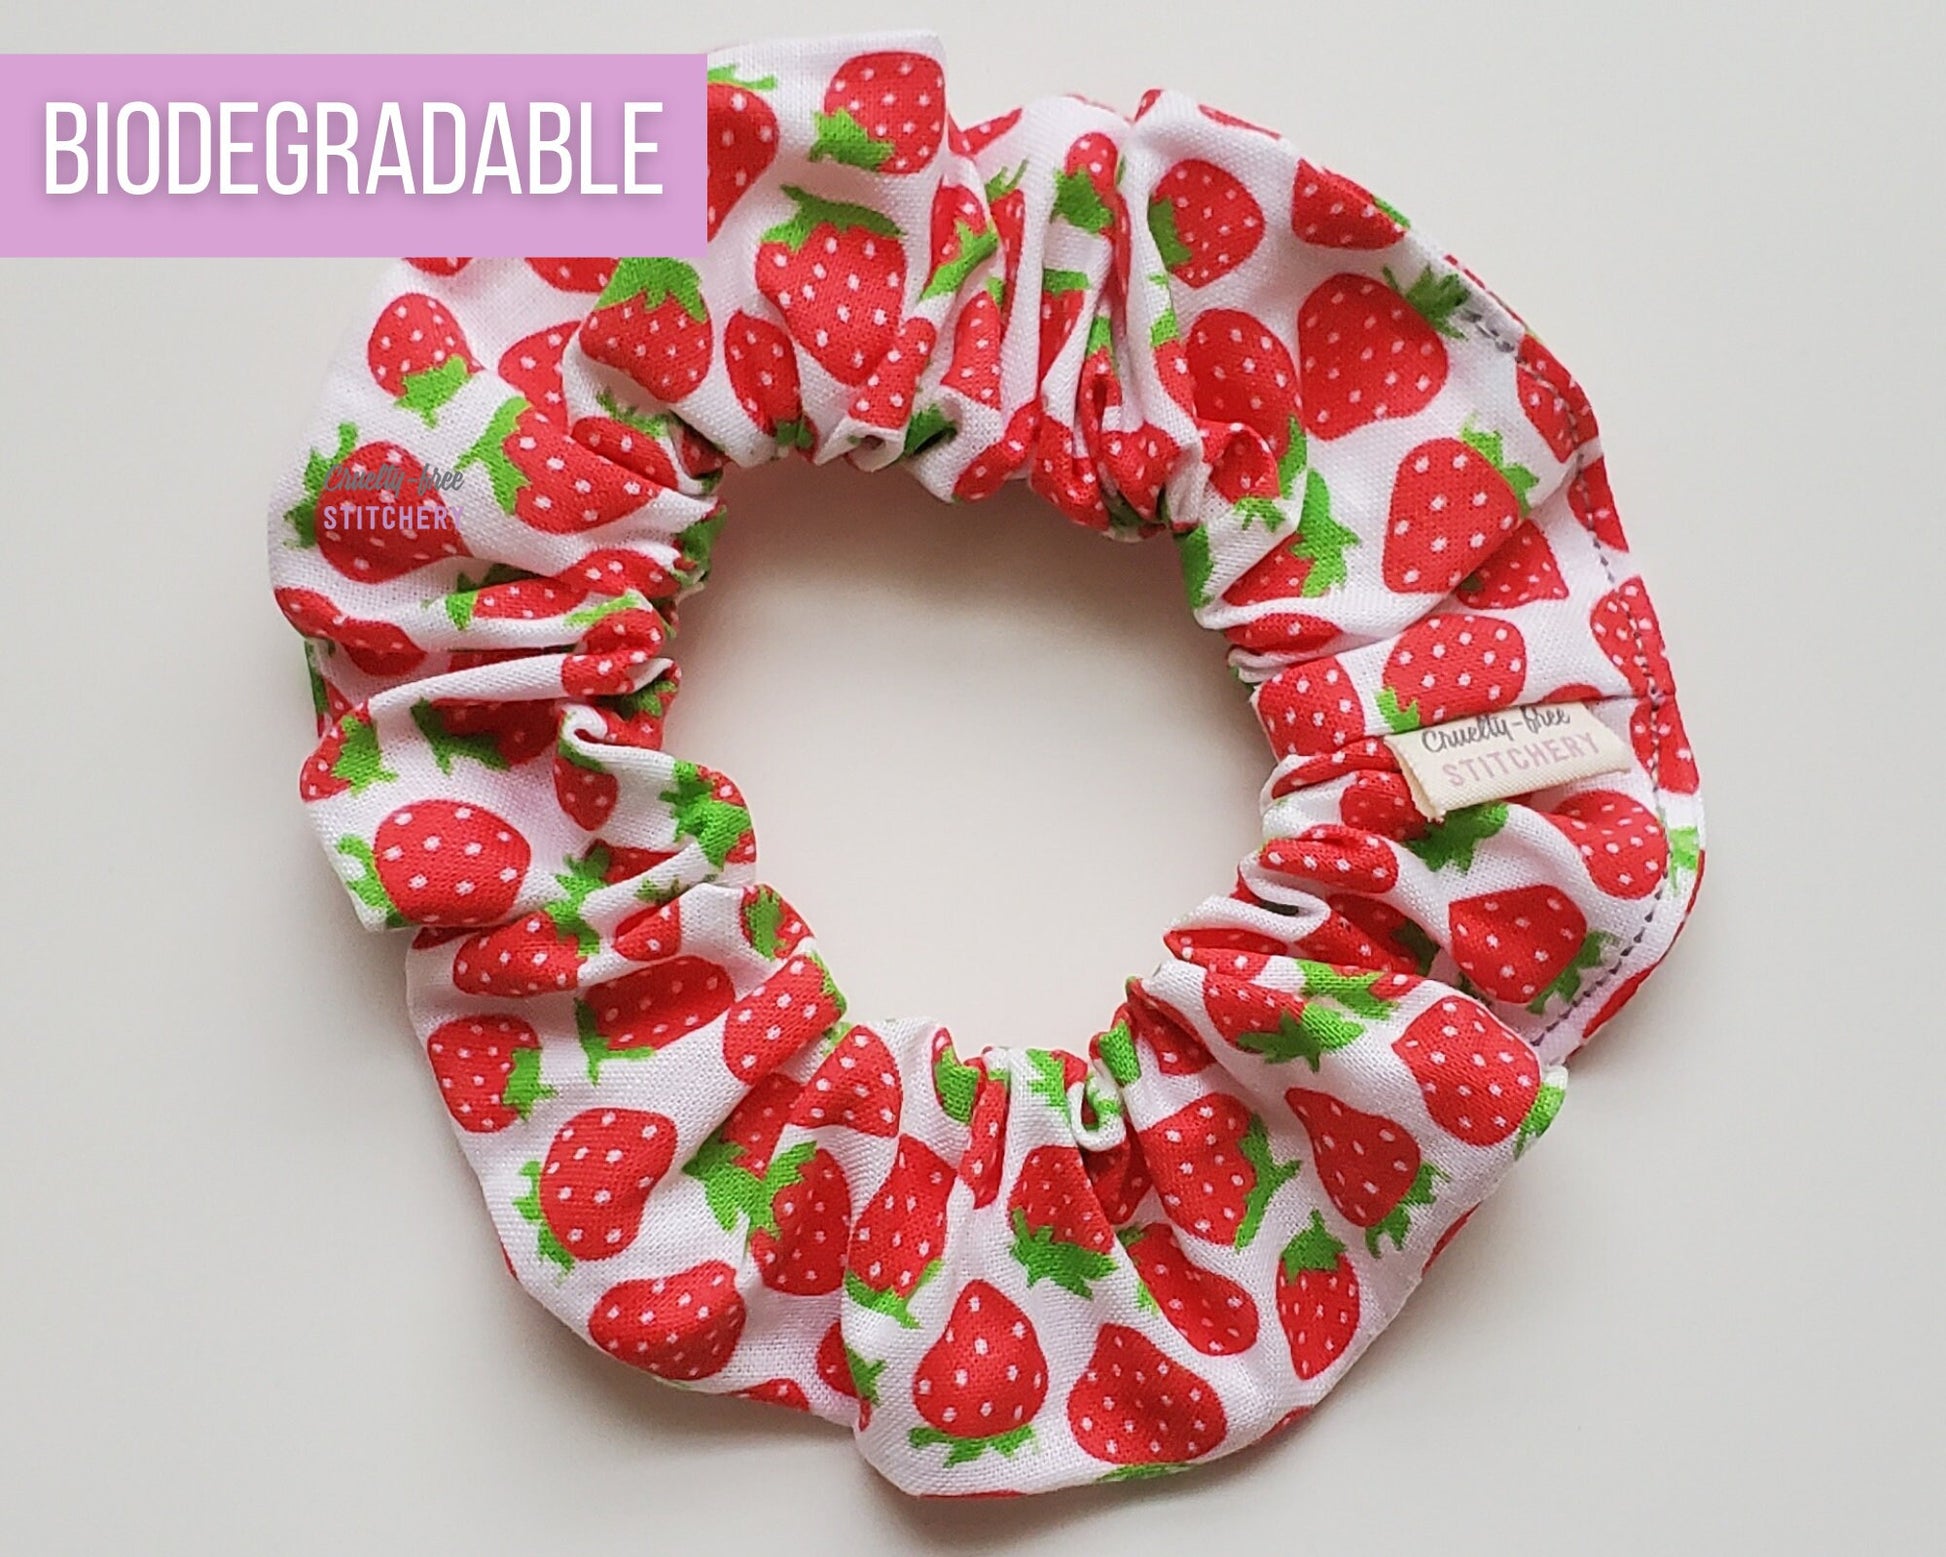 White with red strawberries print scrunchie. The strawberries are tiny and simple, and scattered across the fabric.